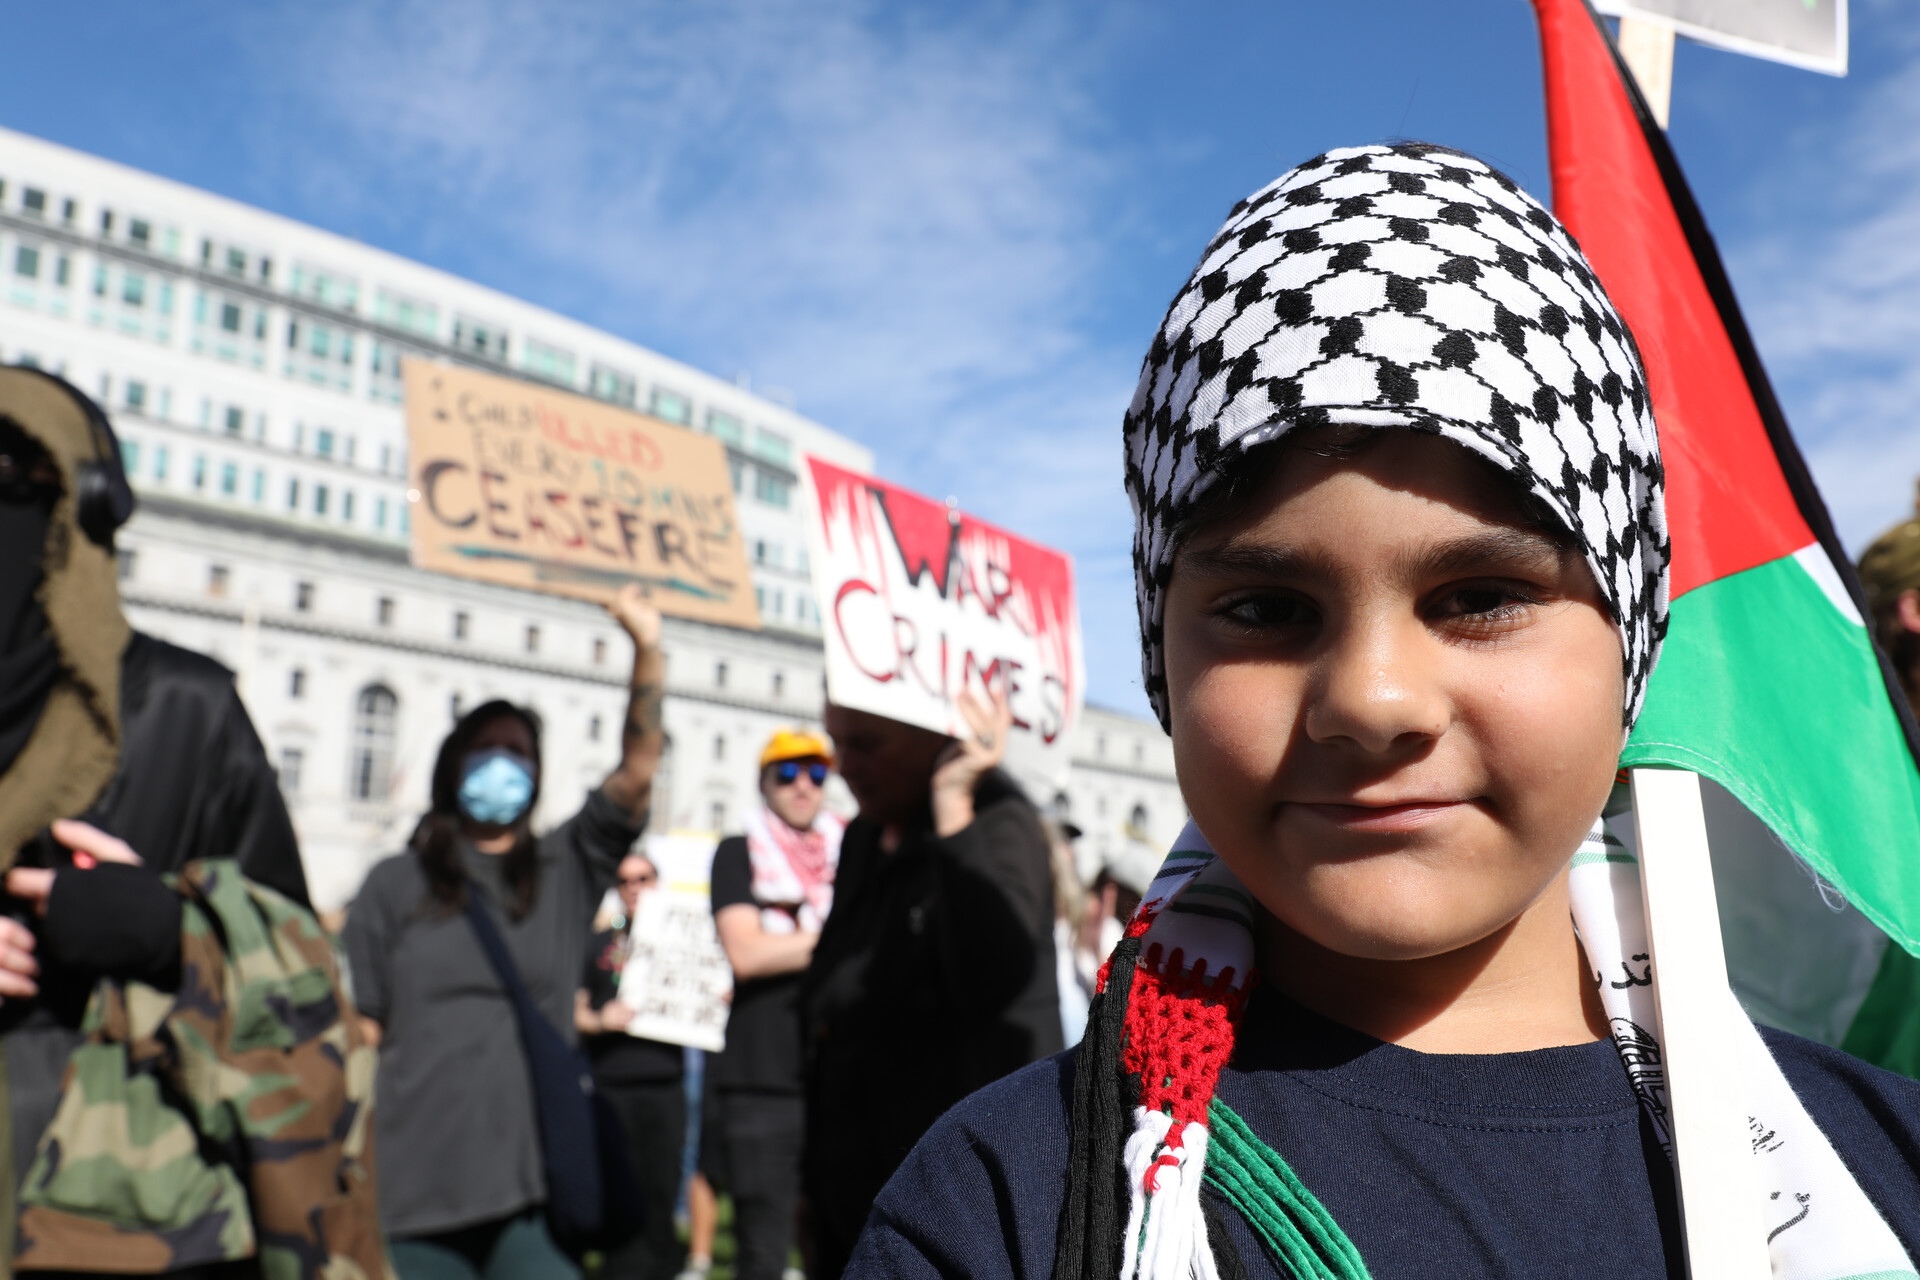 A young boy with a Palestinian flag looks into the camera as protesters chant and hold signs behind him.